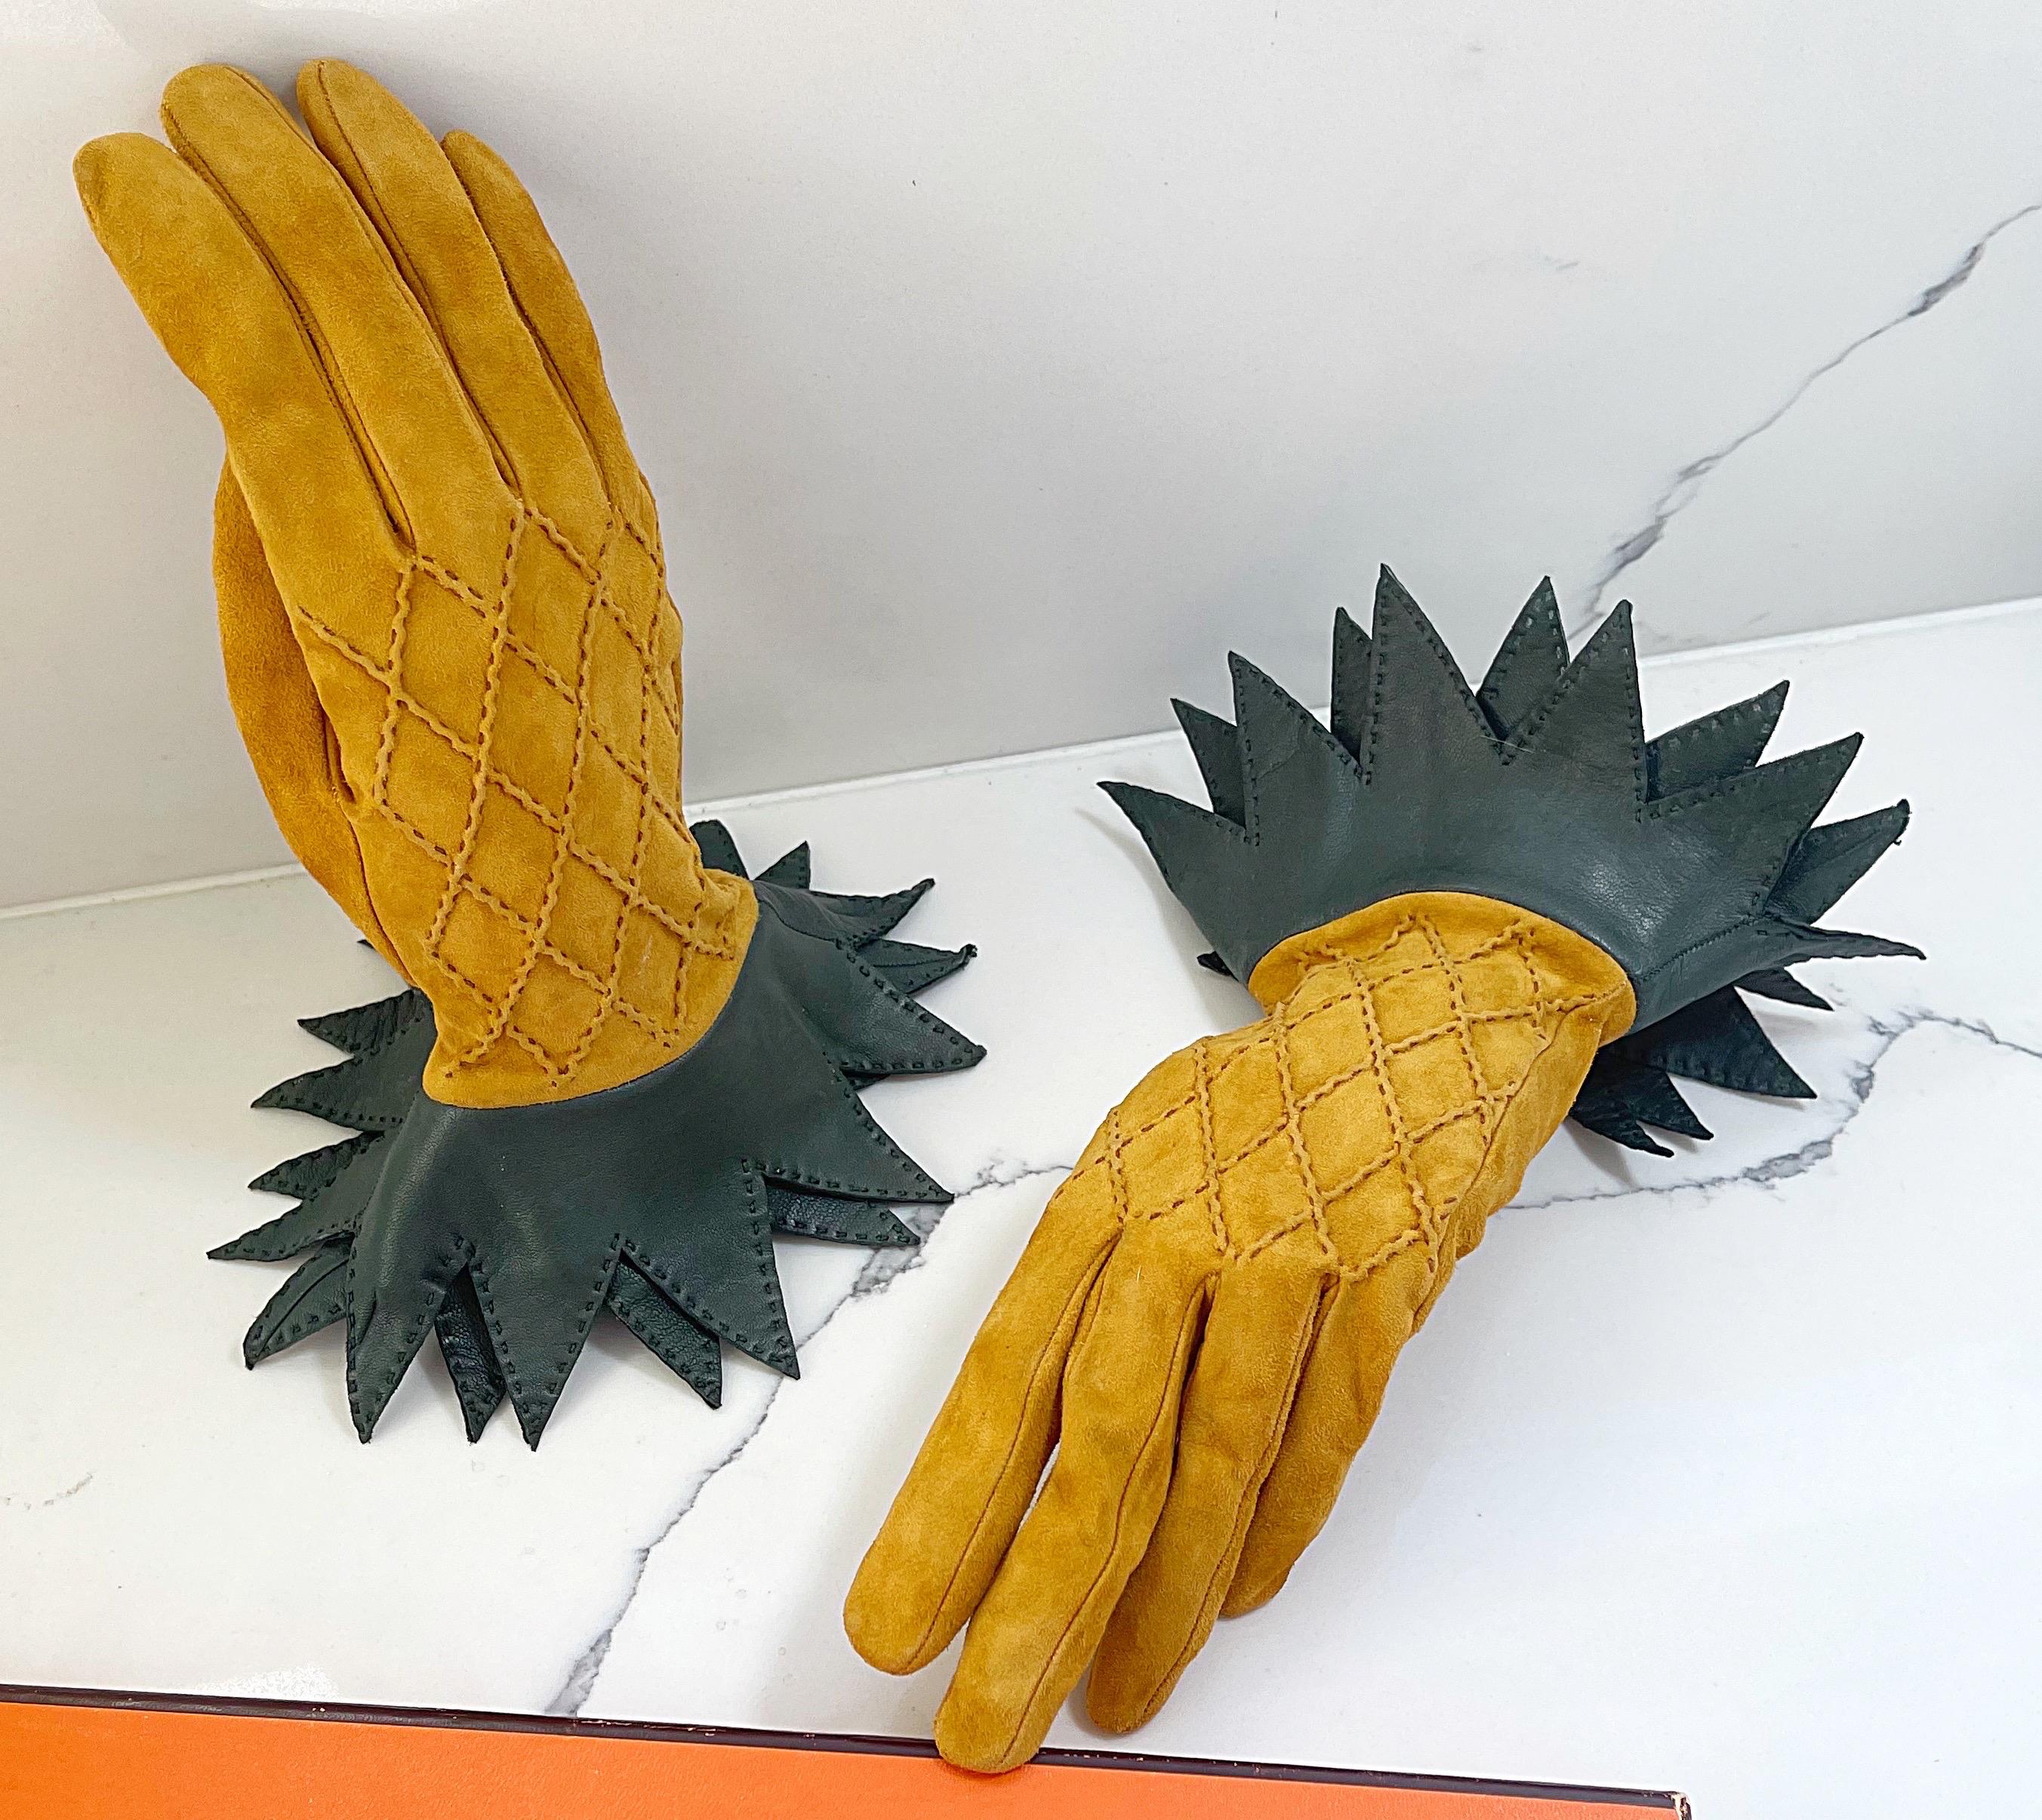 Women's Hermès 1990s Vintage Pineapple Novelty Suede Leather Size 7.5 90s Gloves For Sale